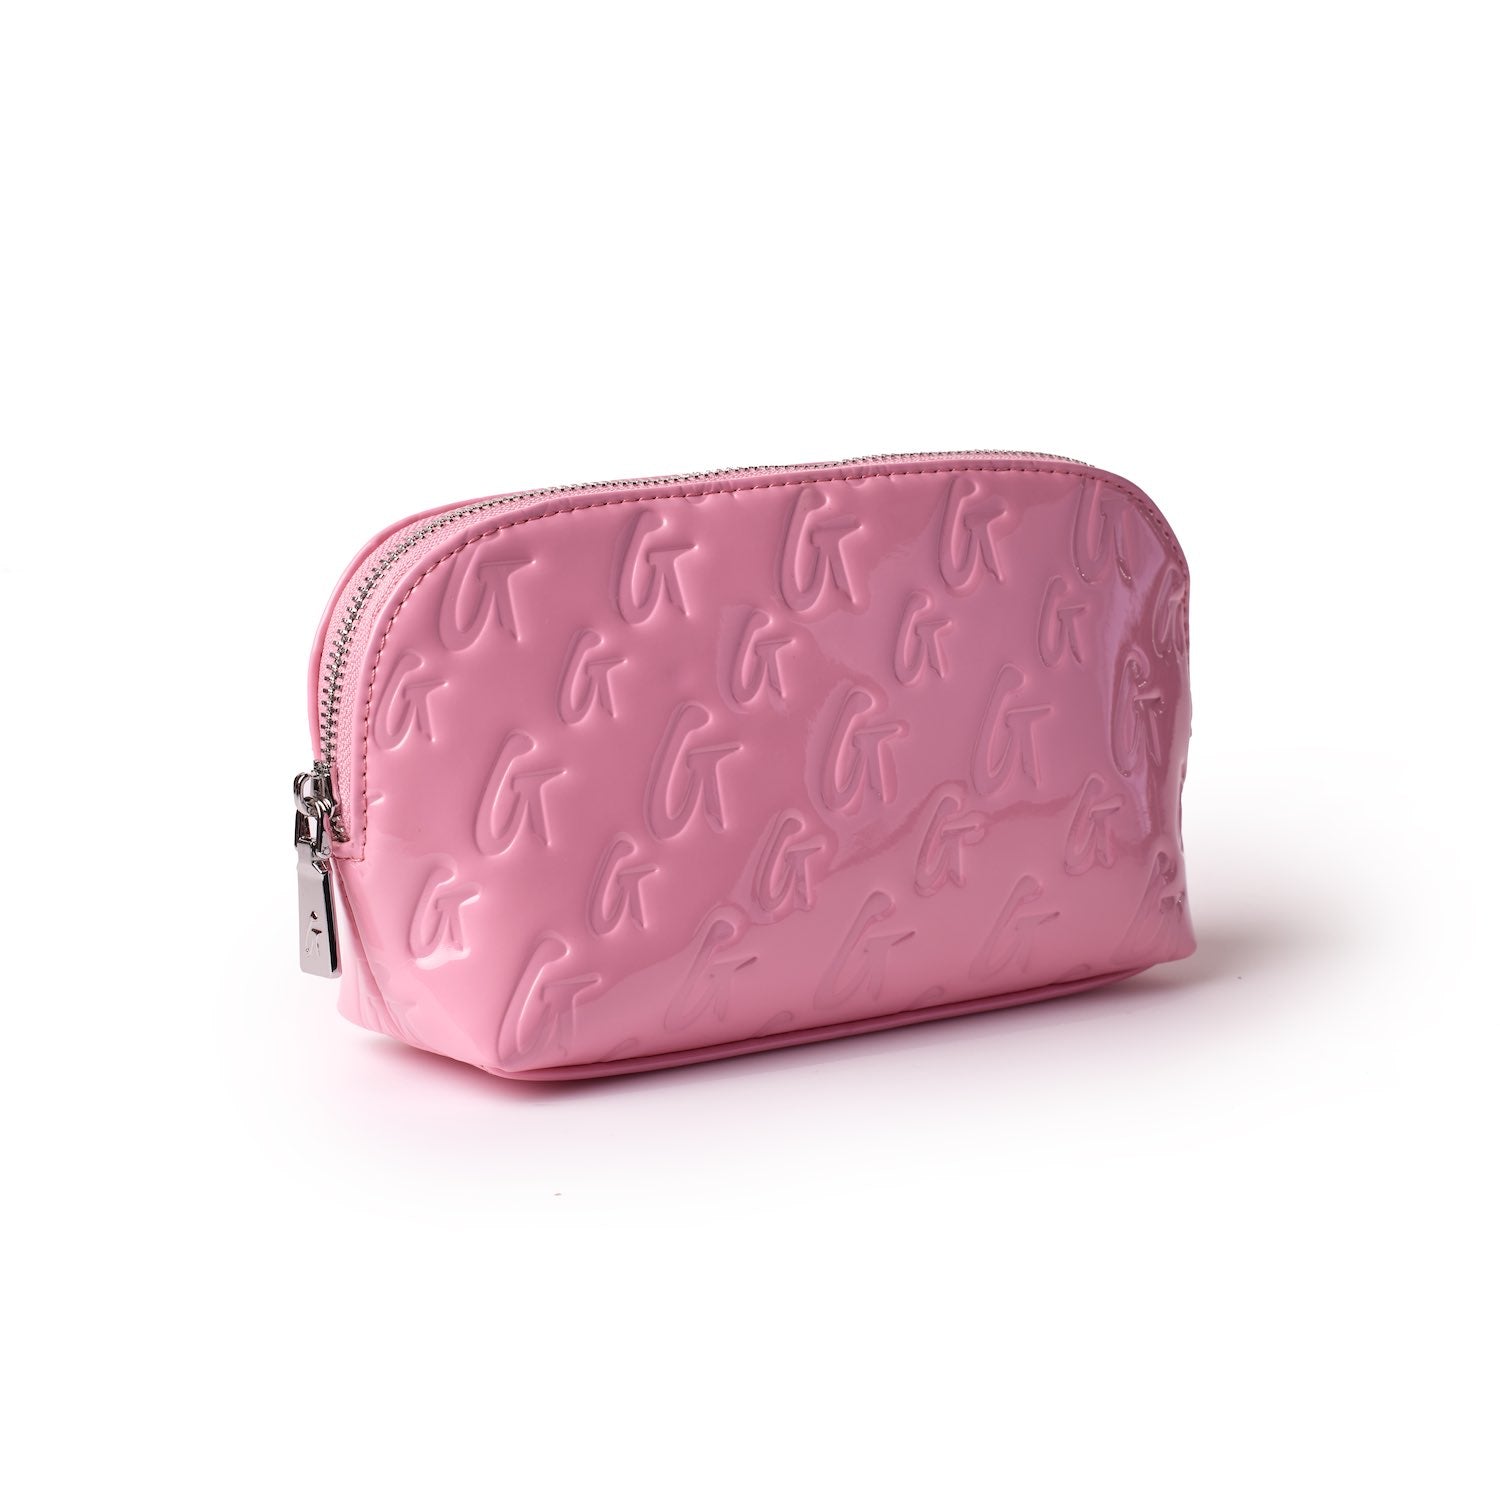 MONOGRAM COSMETIC POUCH MIRROR PINK